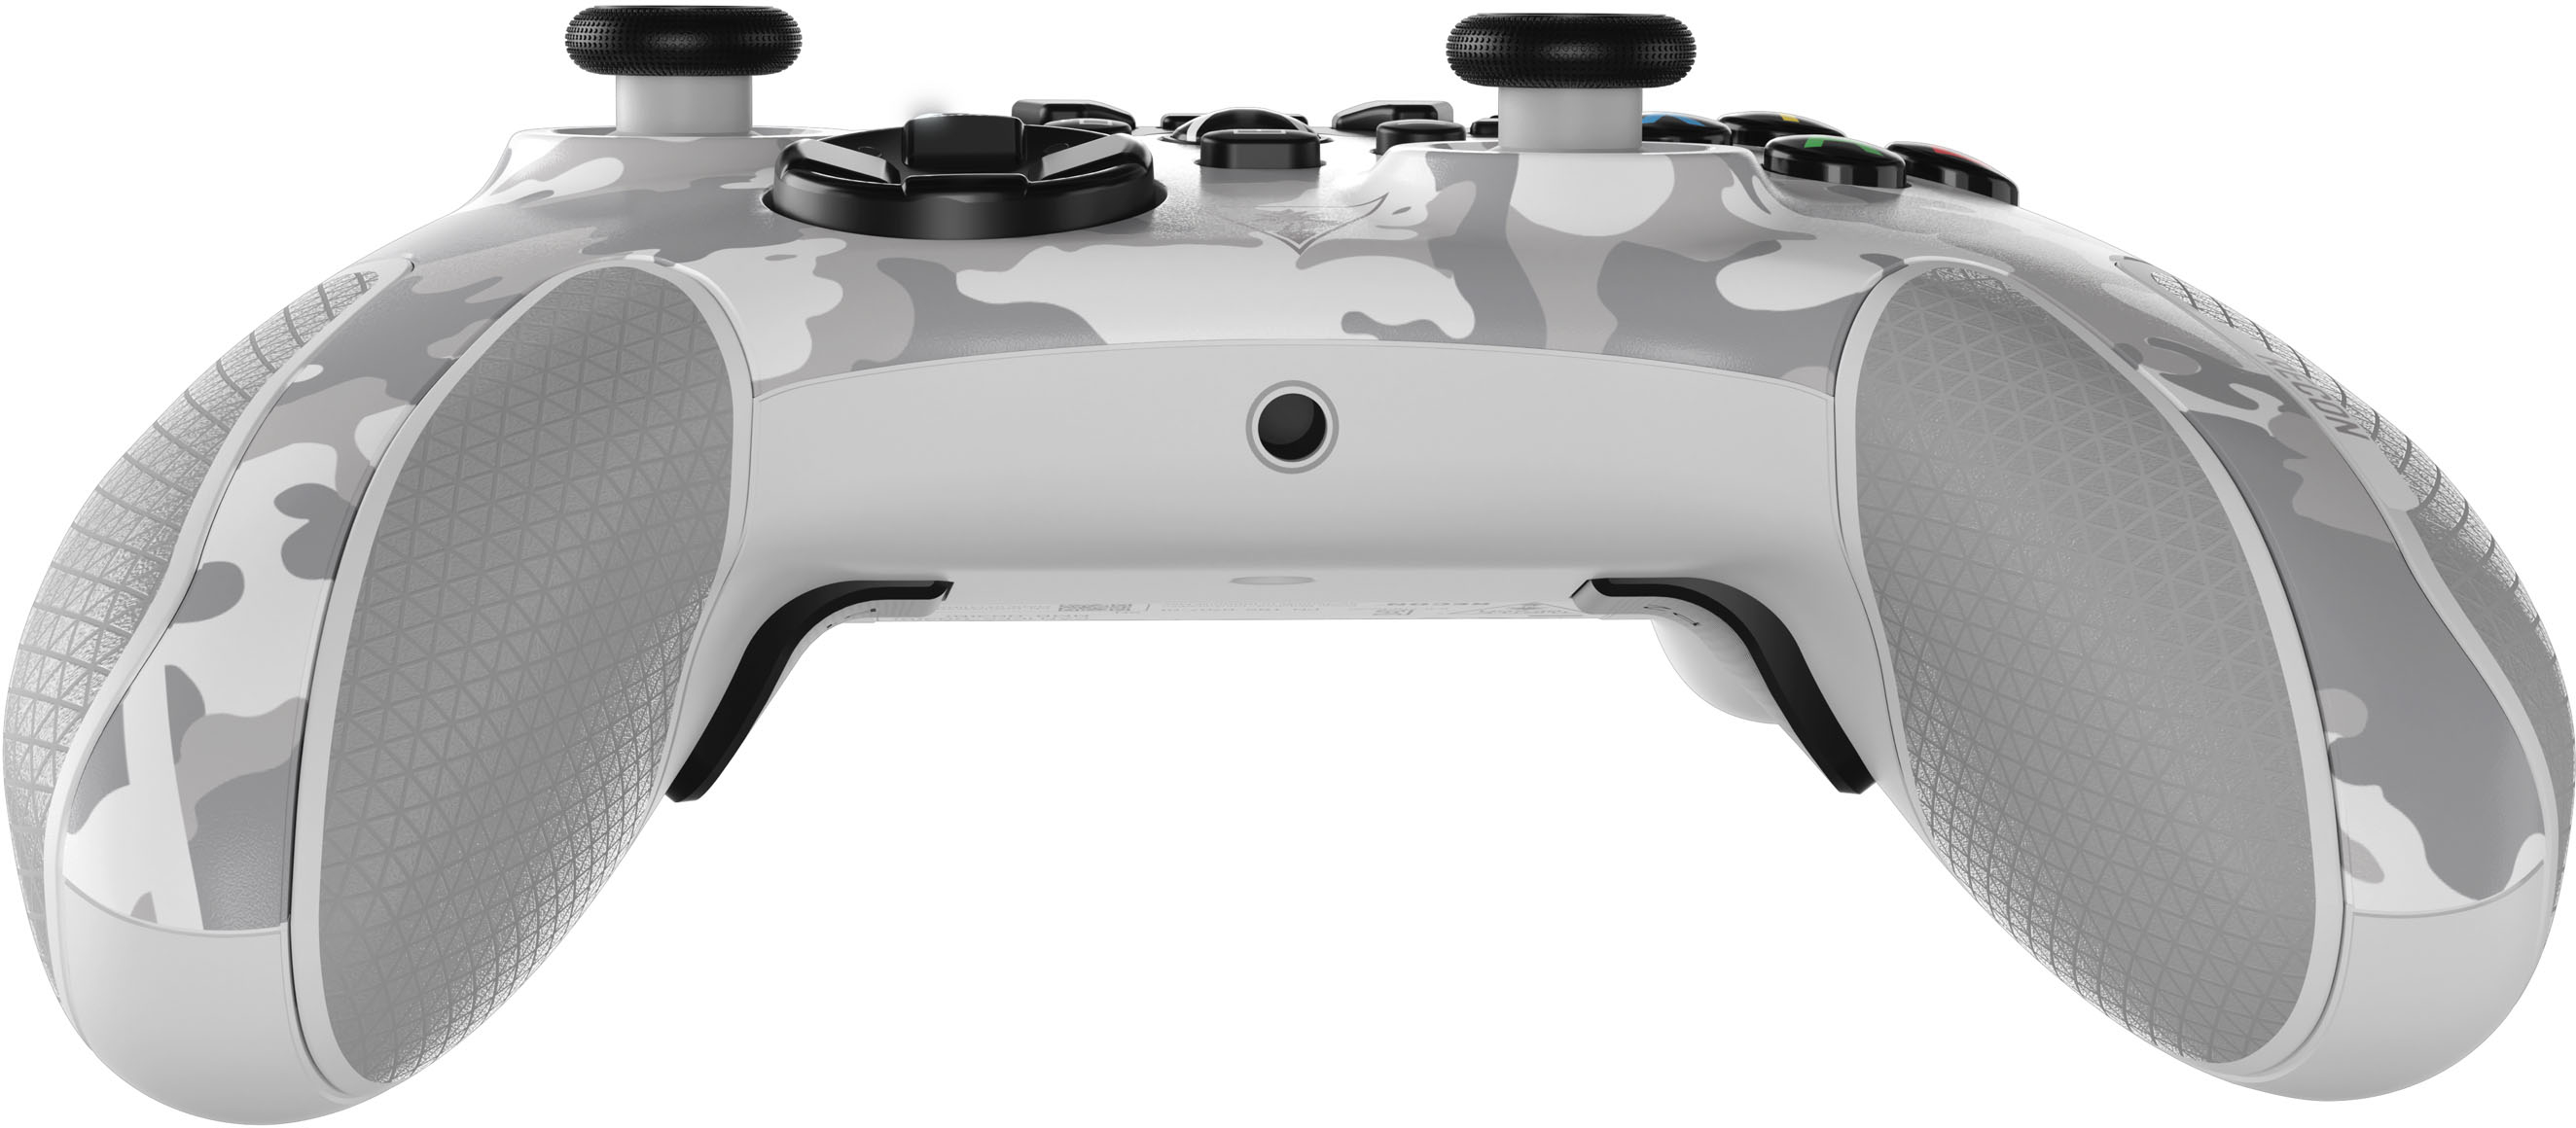  Microsoft Xbox One Wireless Gaming Controller Arctic